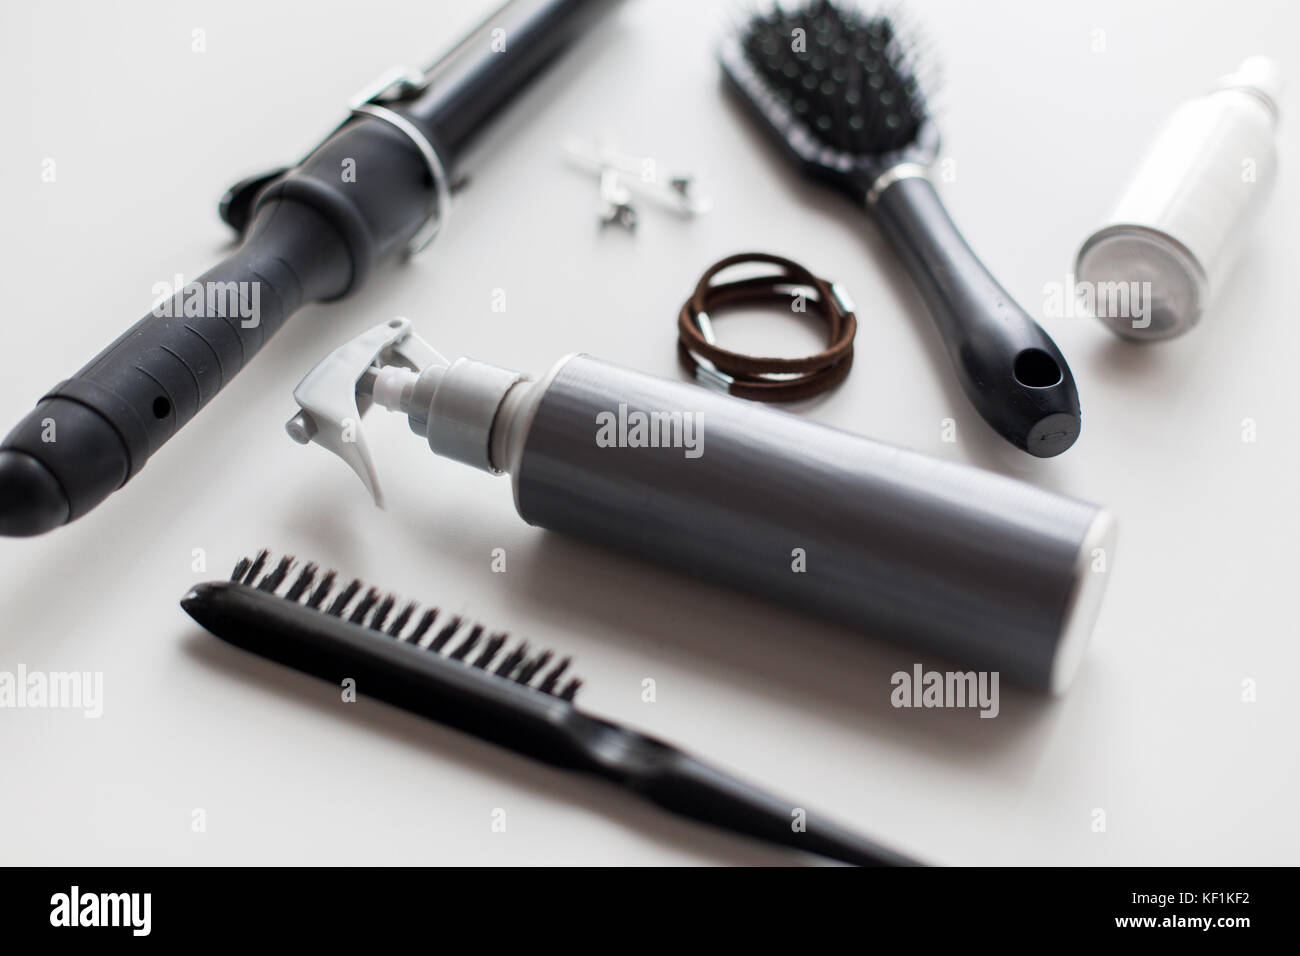 styling spay, brushes, hair ties and curling iron Stock Photo